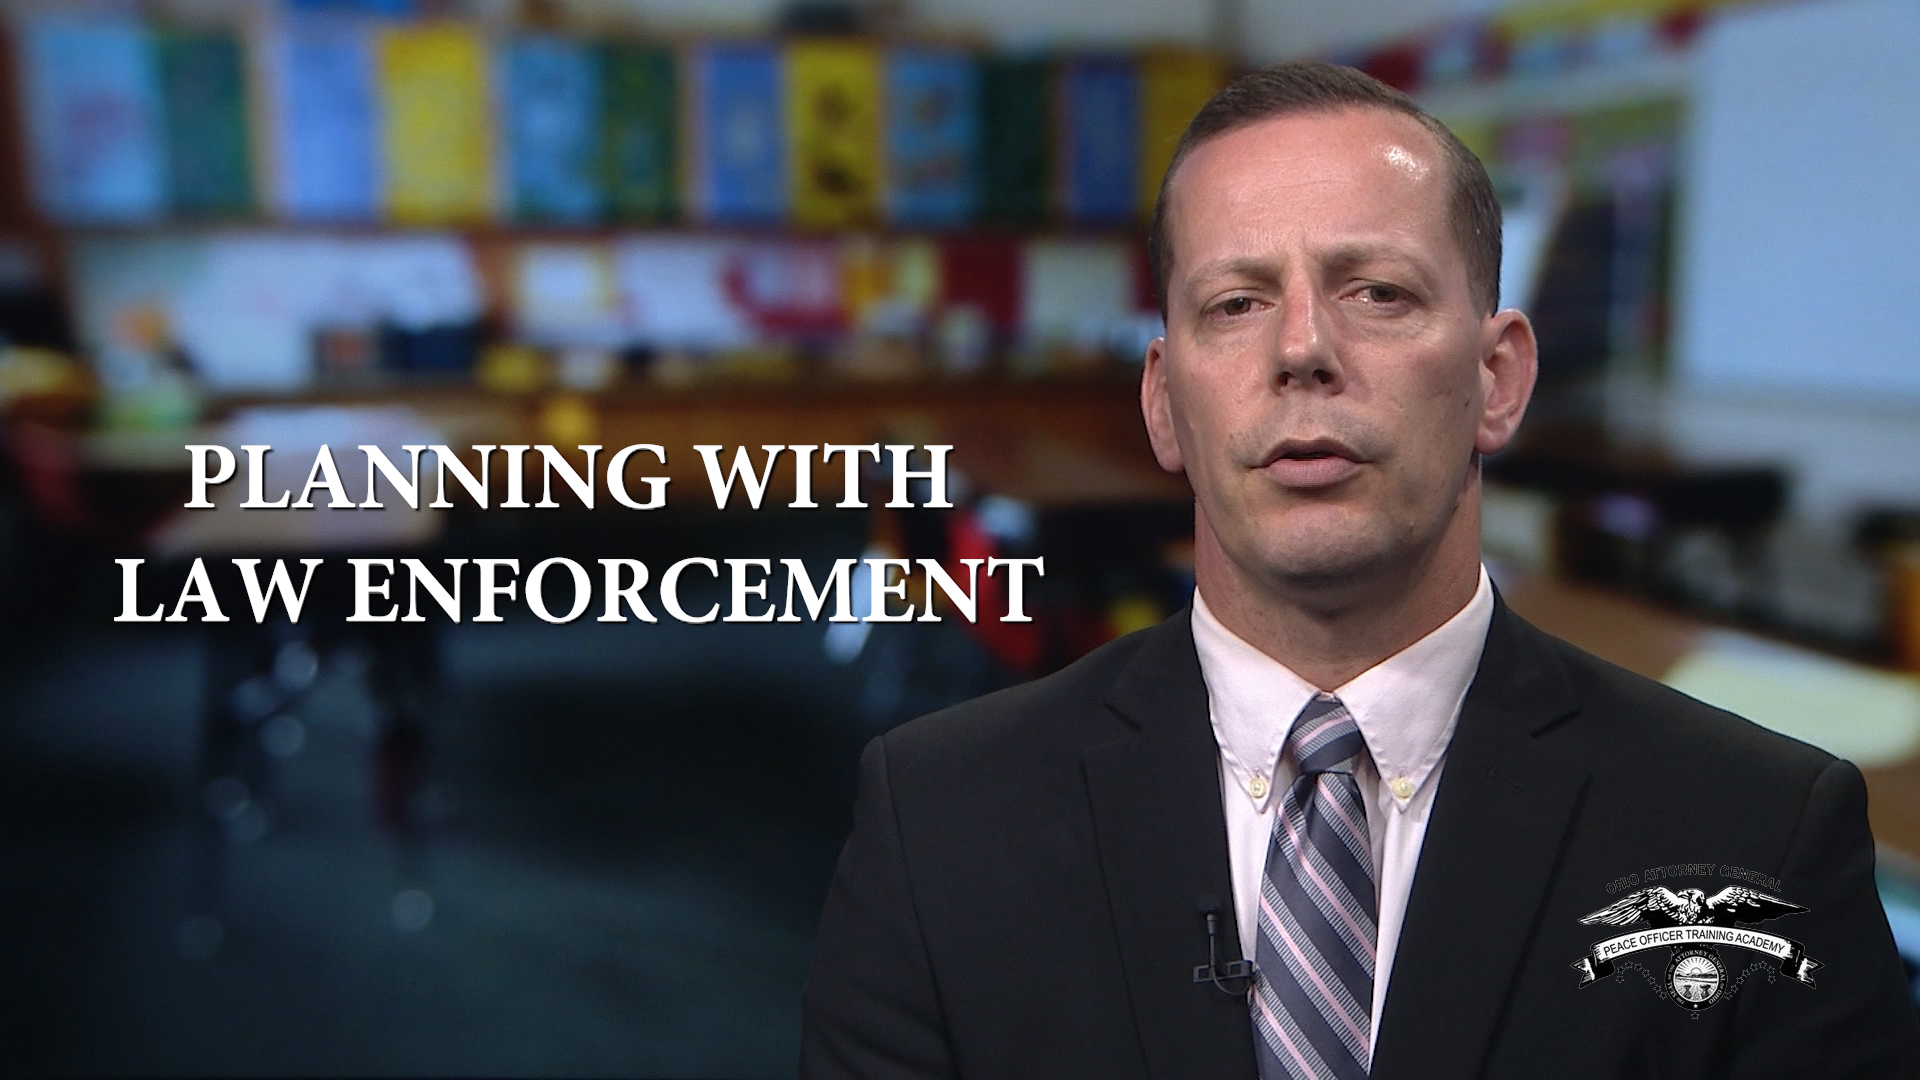 Video 1: Planning With Law Enforcement